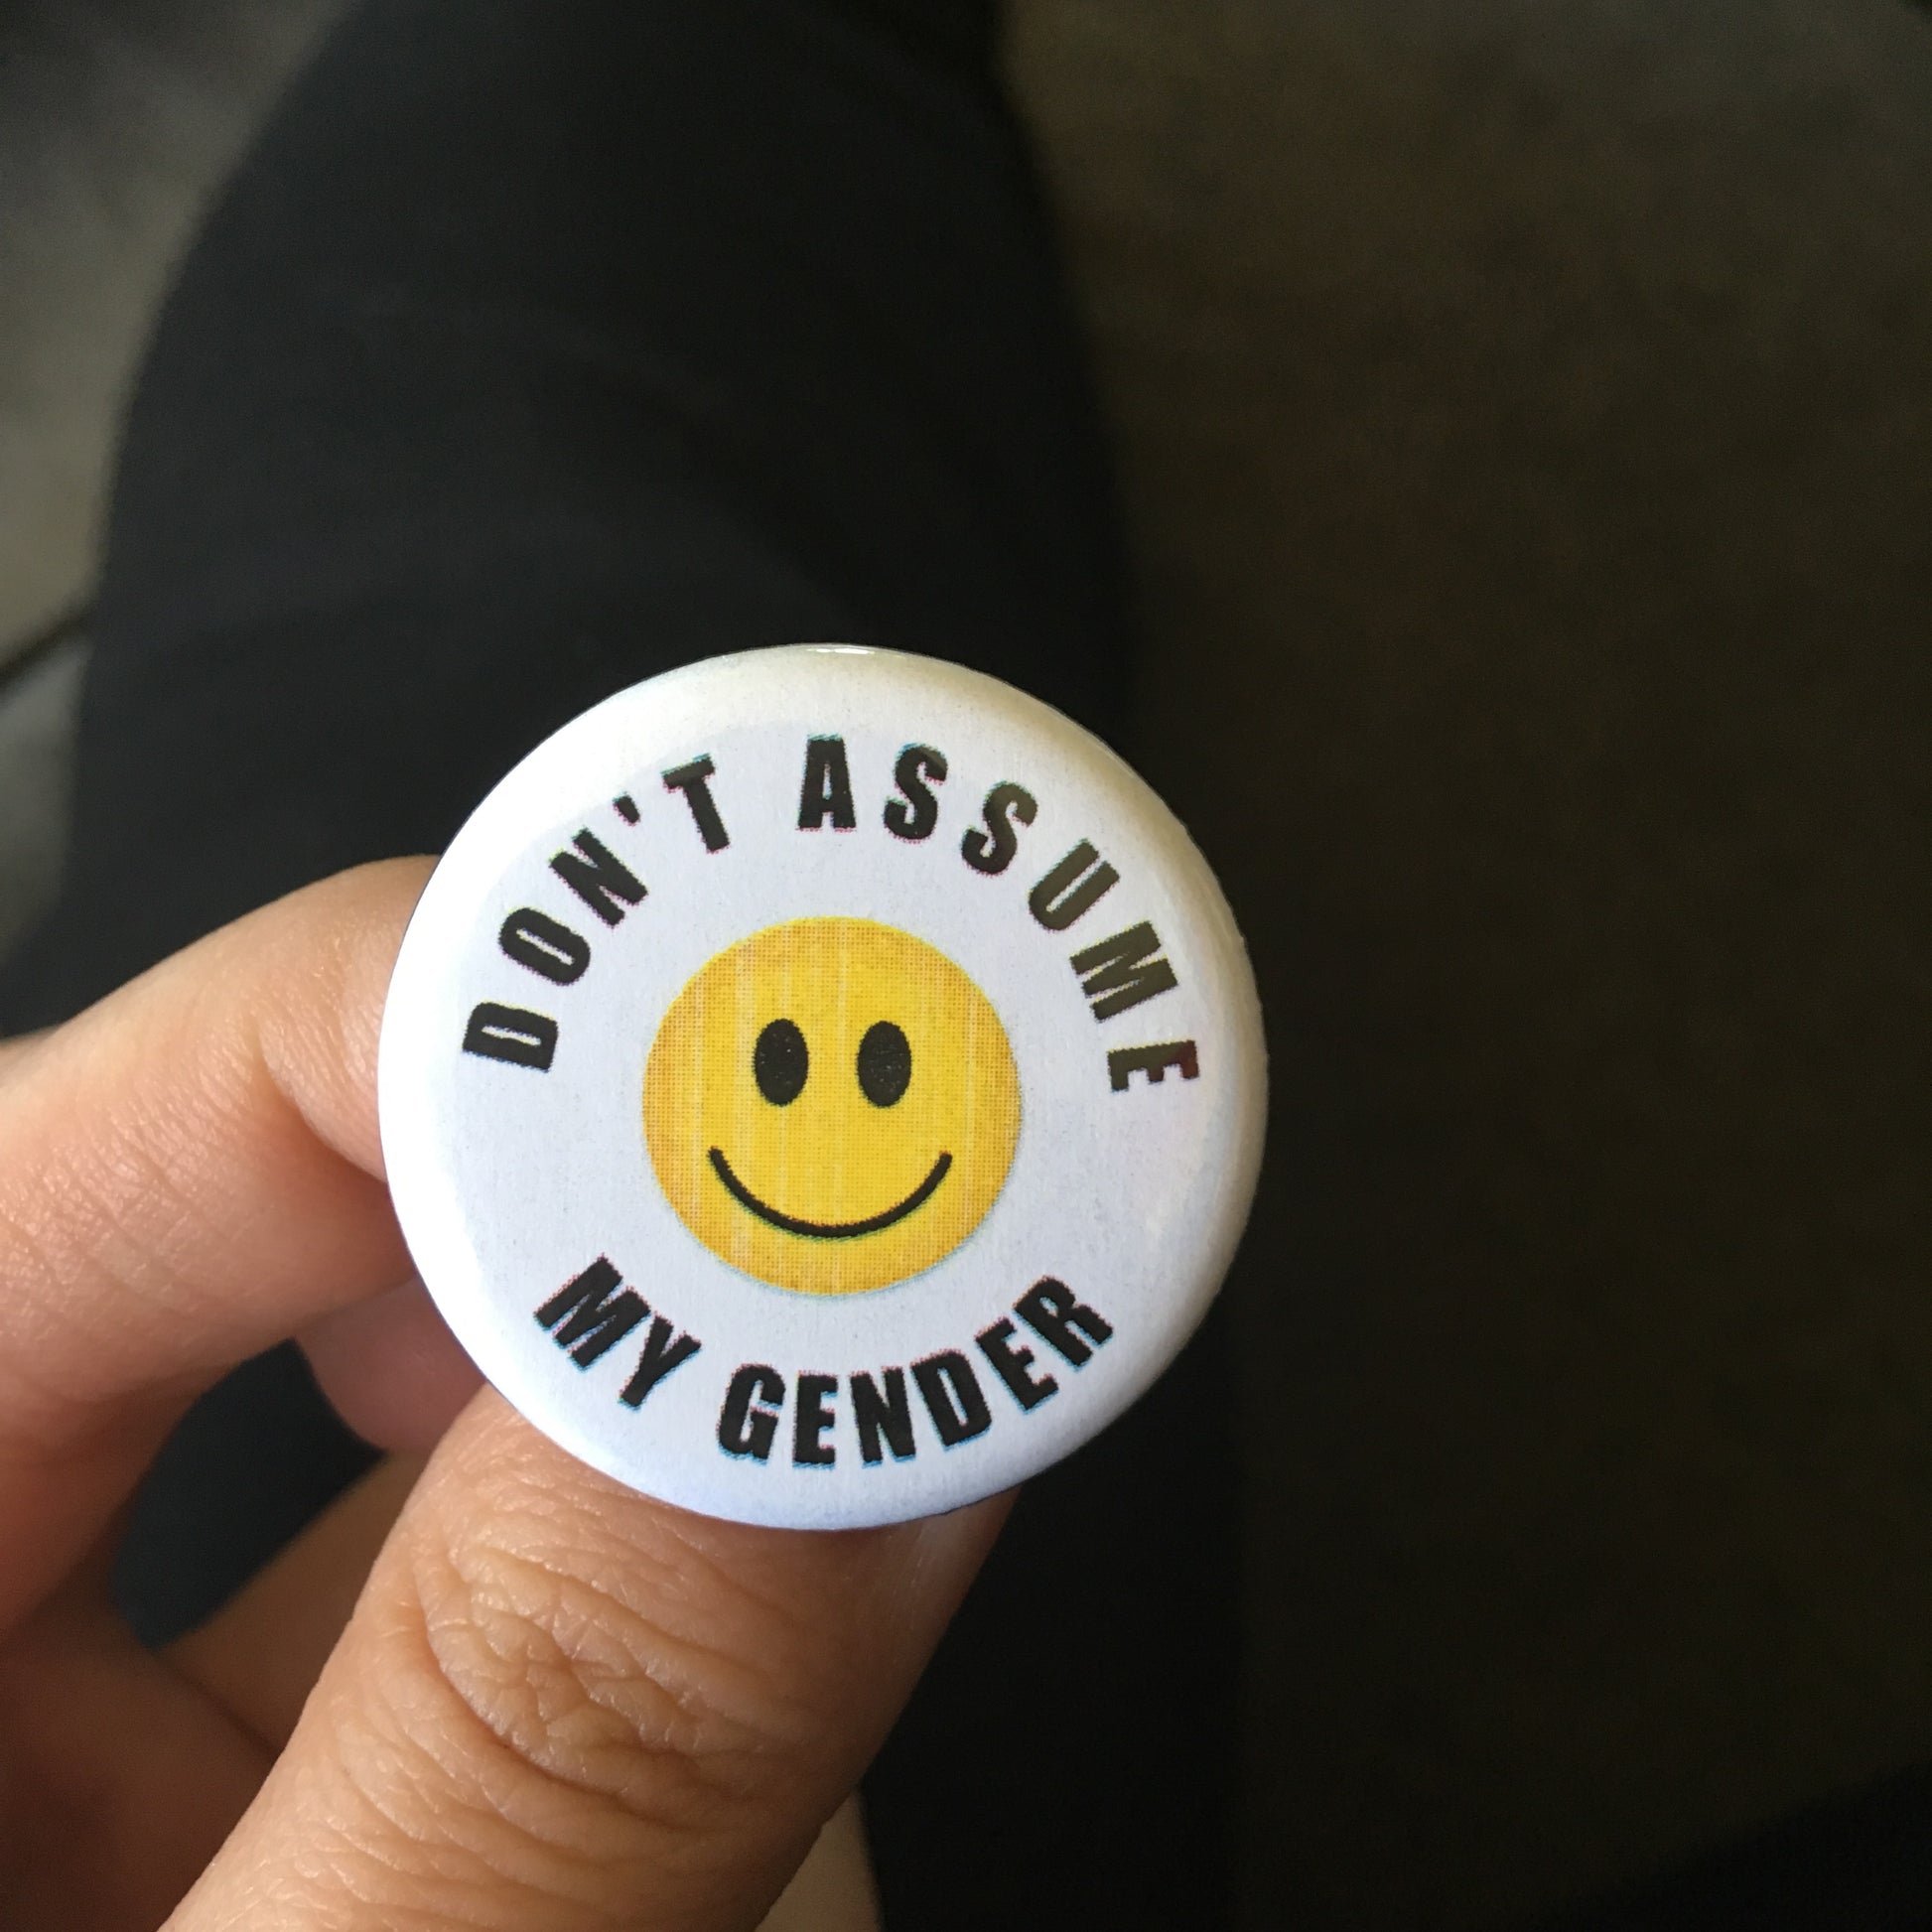 Don’t assume my gender - Radical Buttons